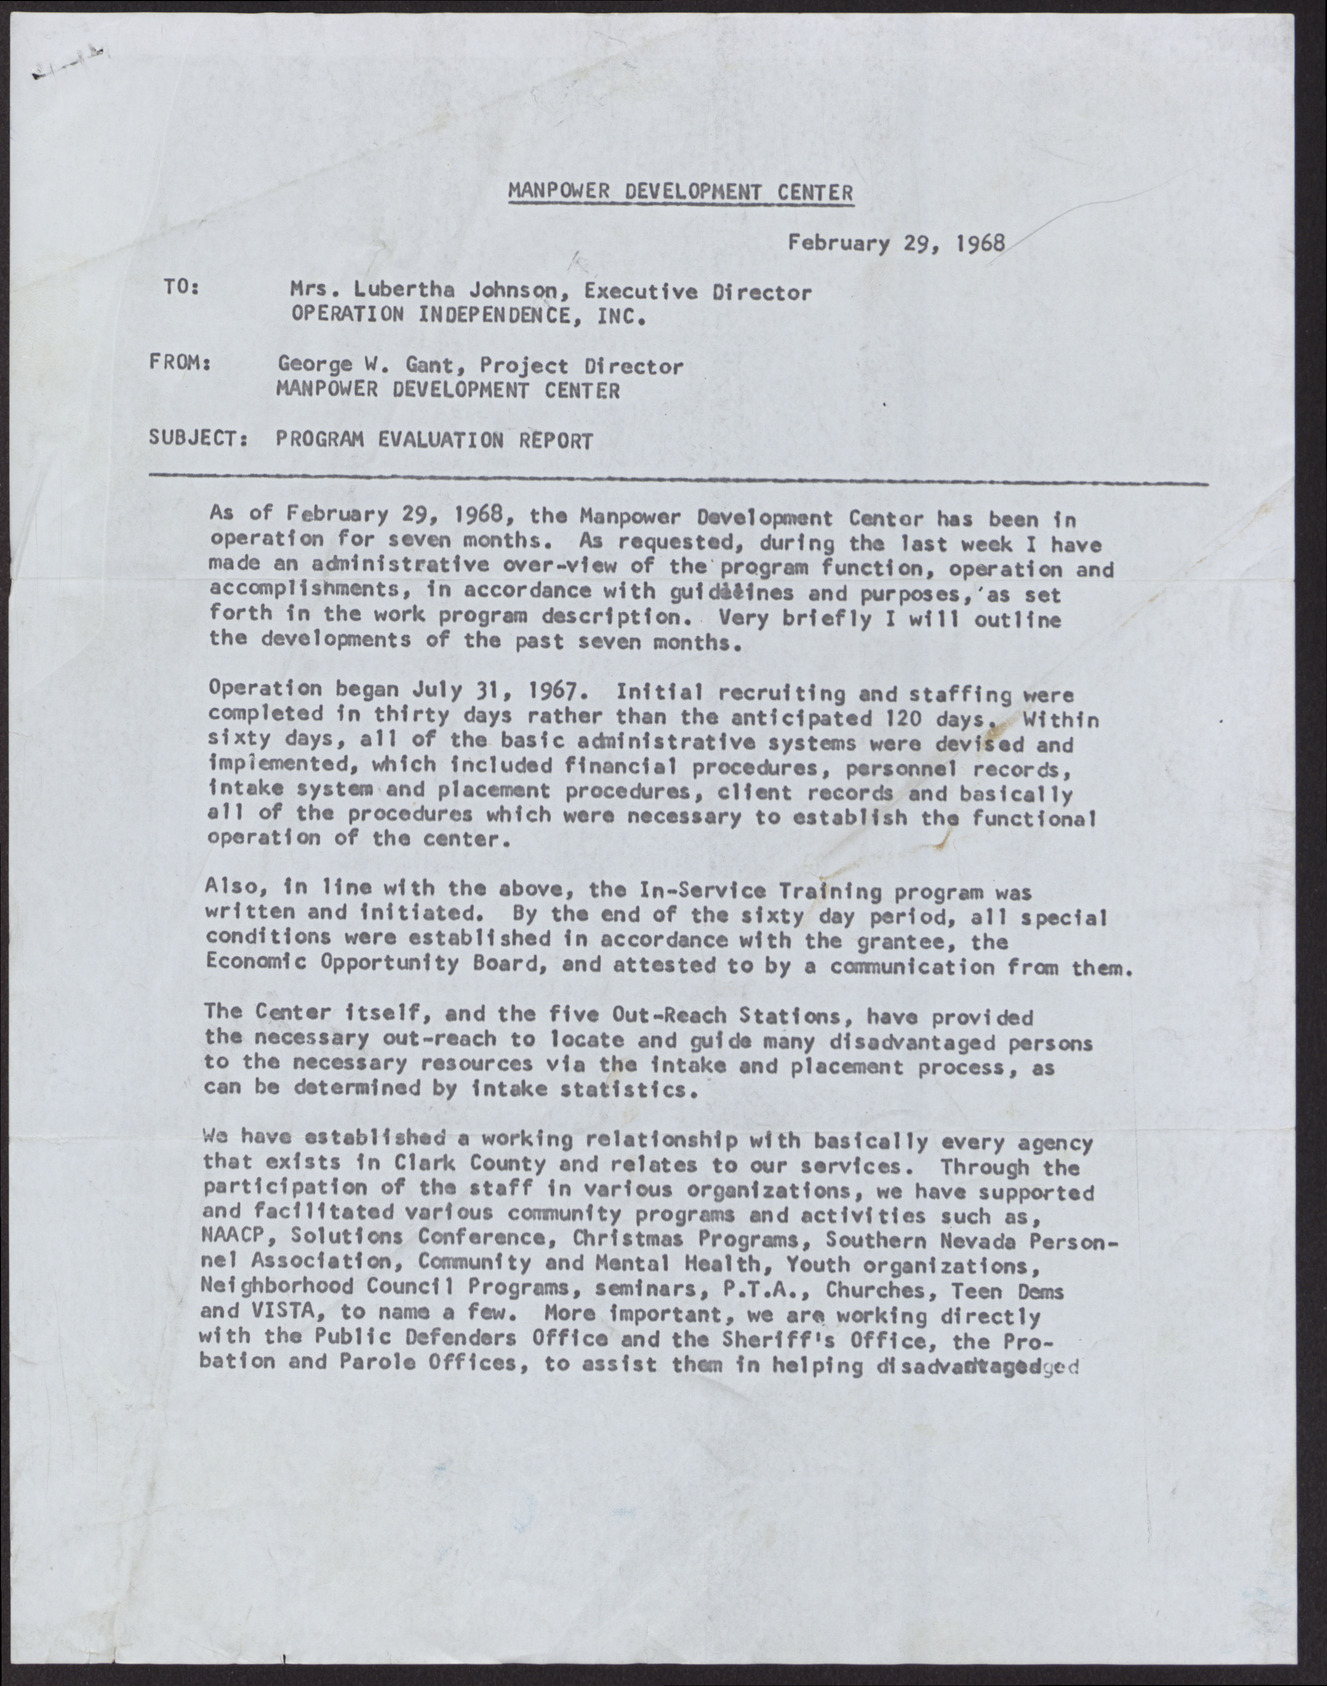 Letter to Mrs. Lubertha Johnson from George W. Gant (3 pages), February 29, 1968